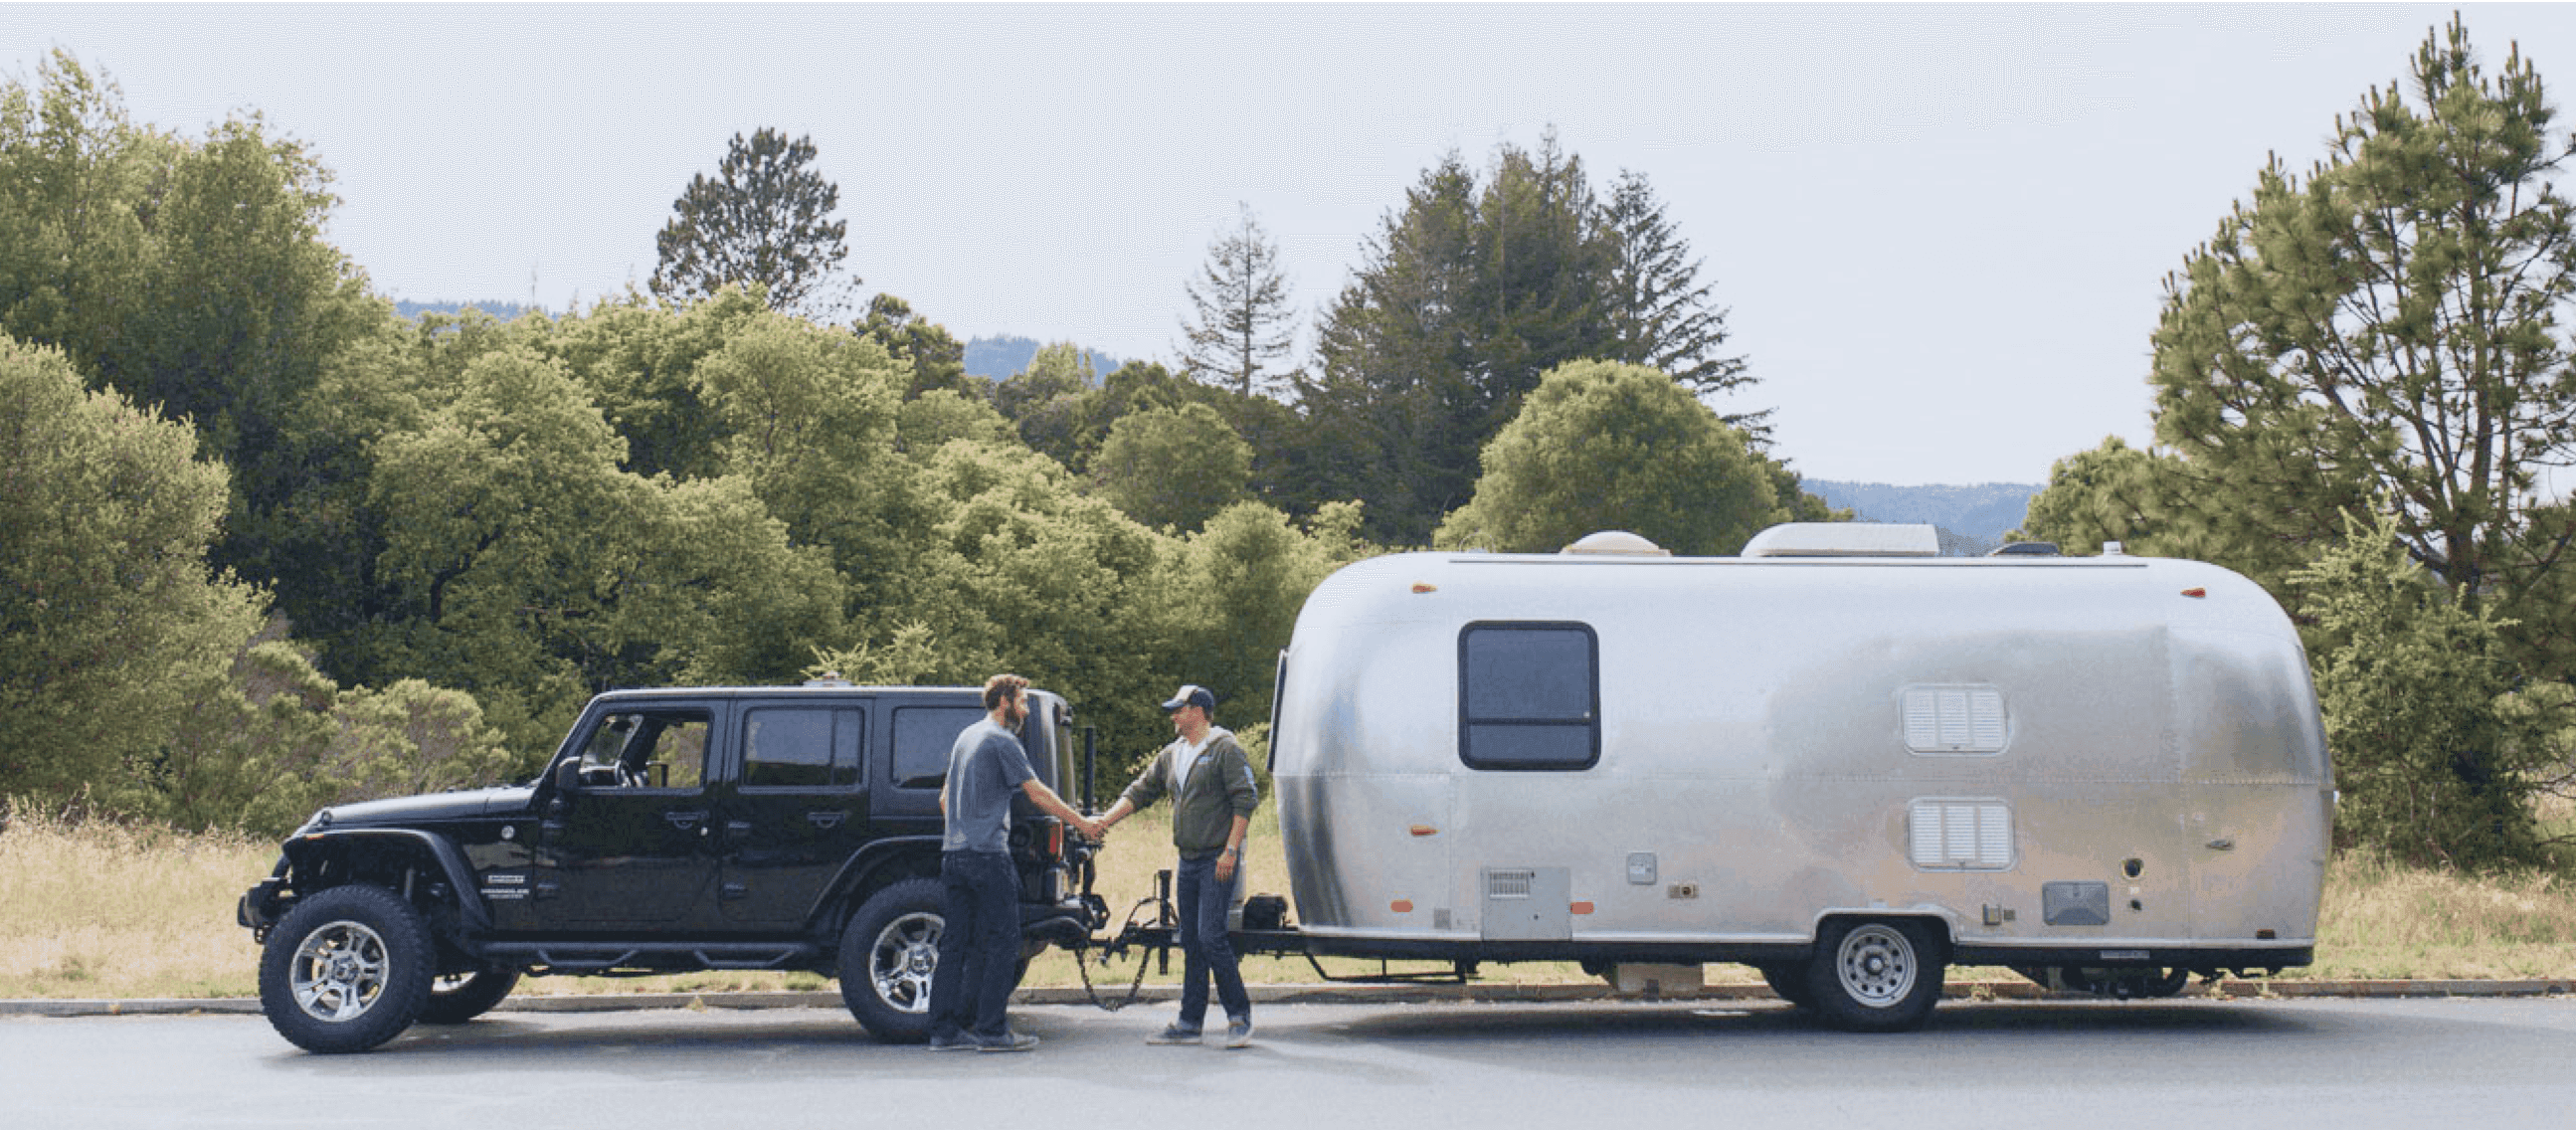 Comprehensive guide to Outdoorsy’s RV insurance